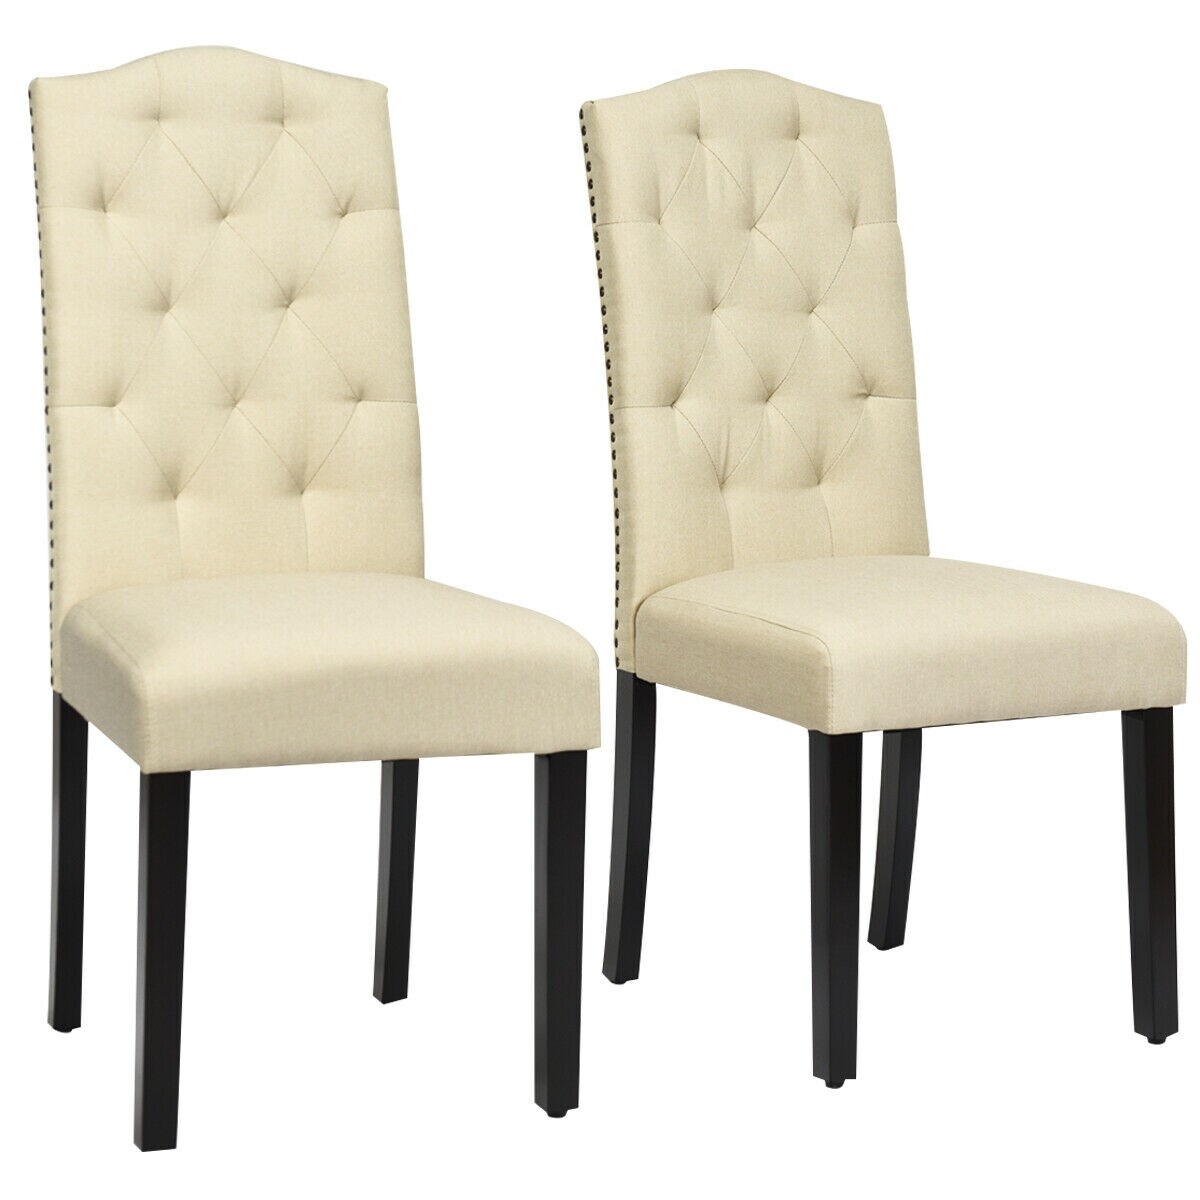 Wellfor 2 Piece High Back Dining Chair, Tufted Nailhead Chairs